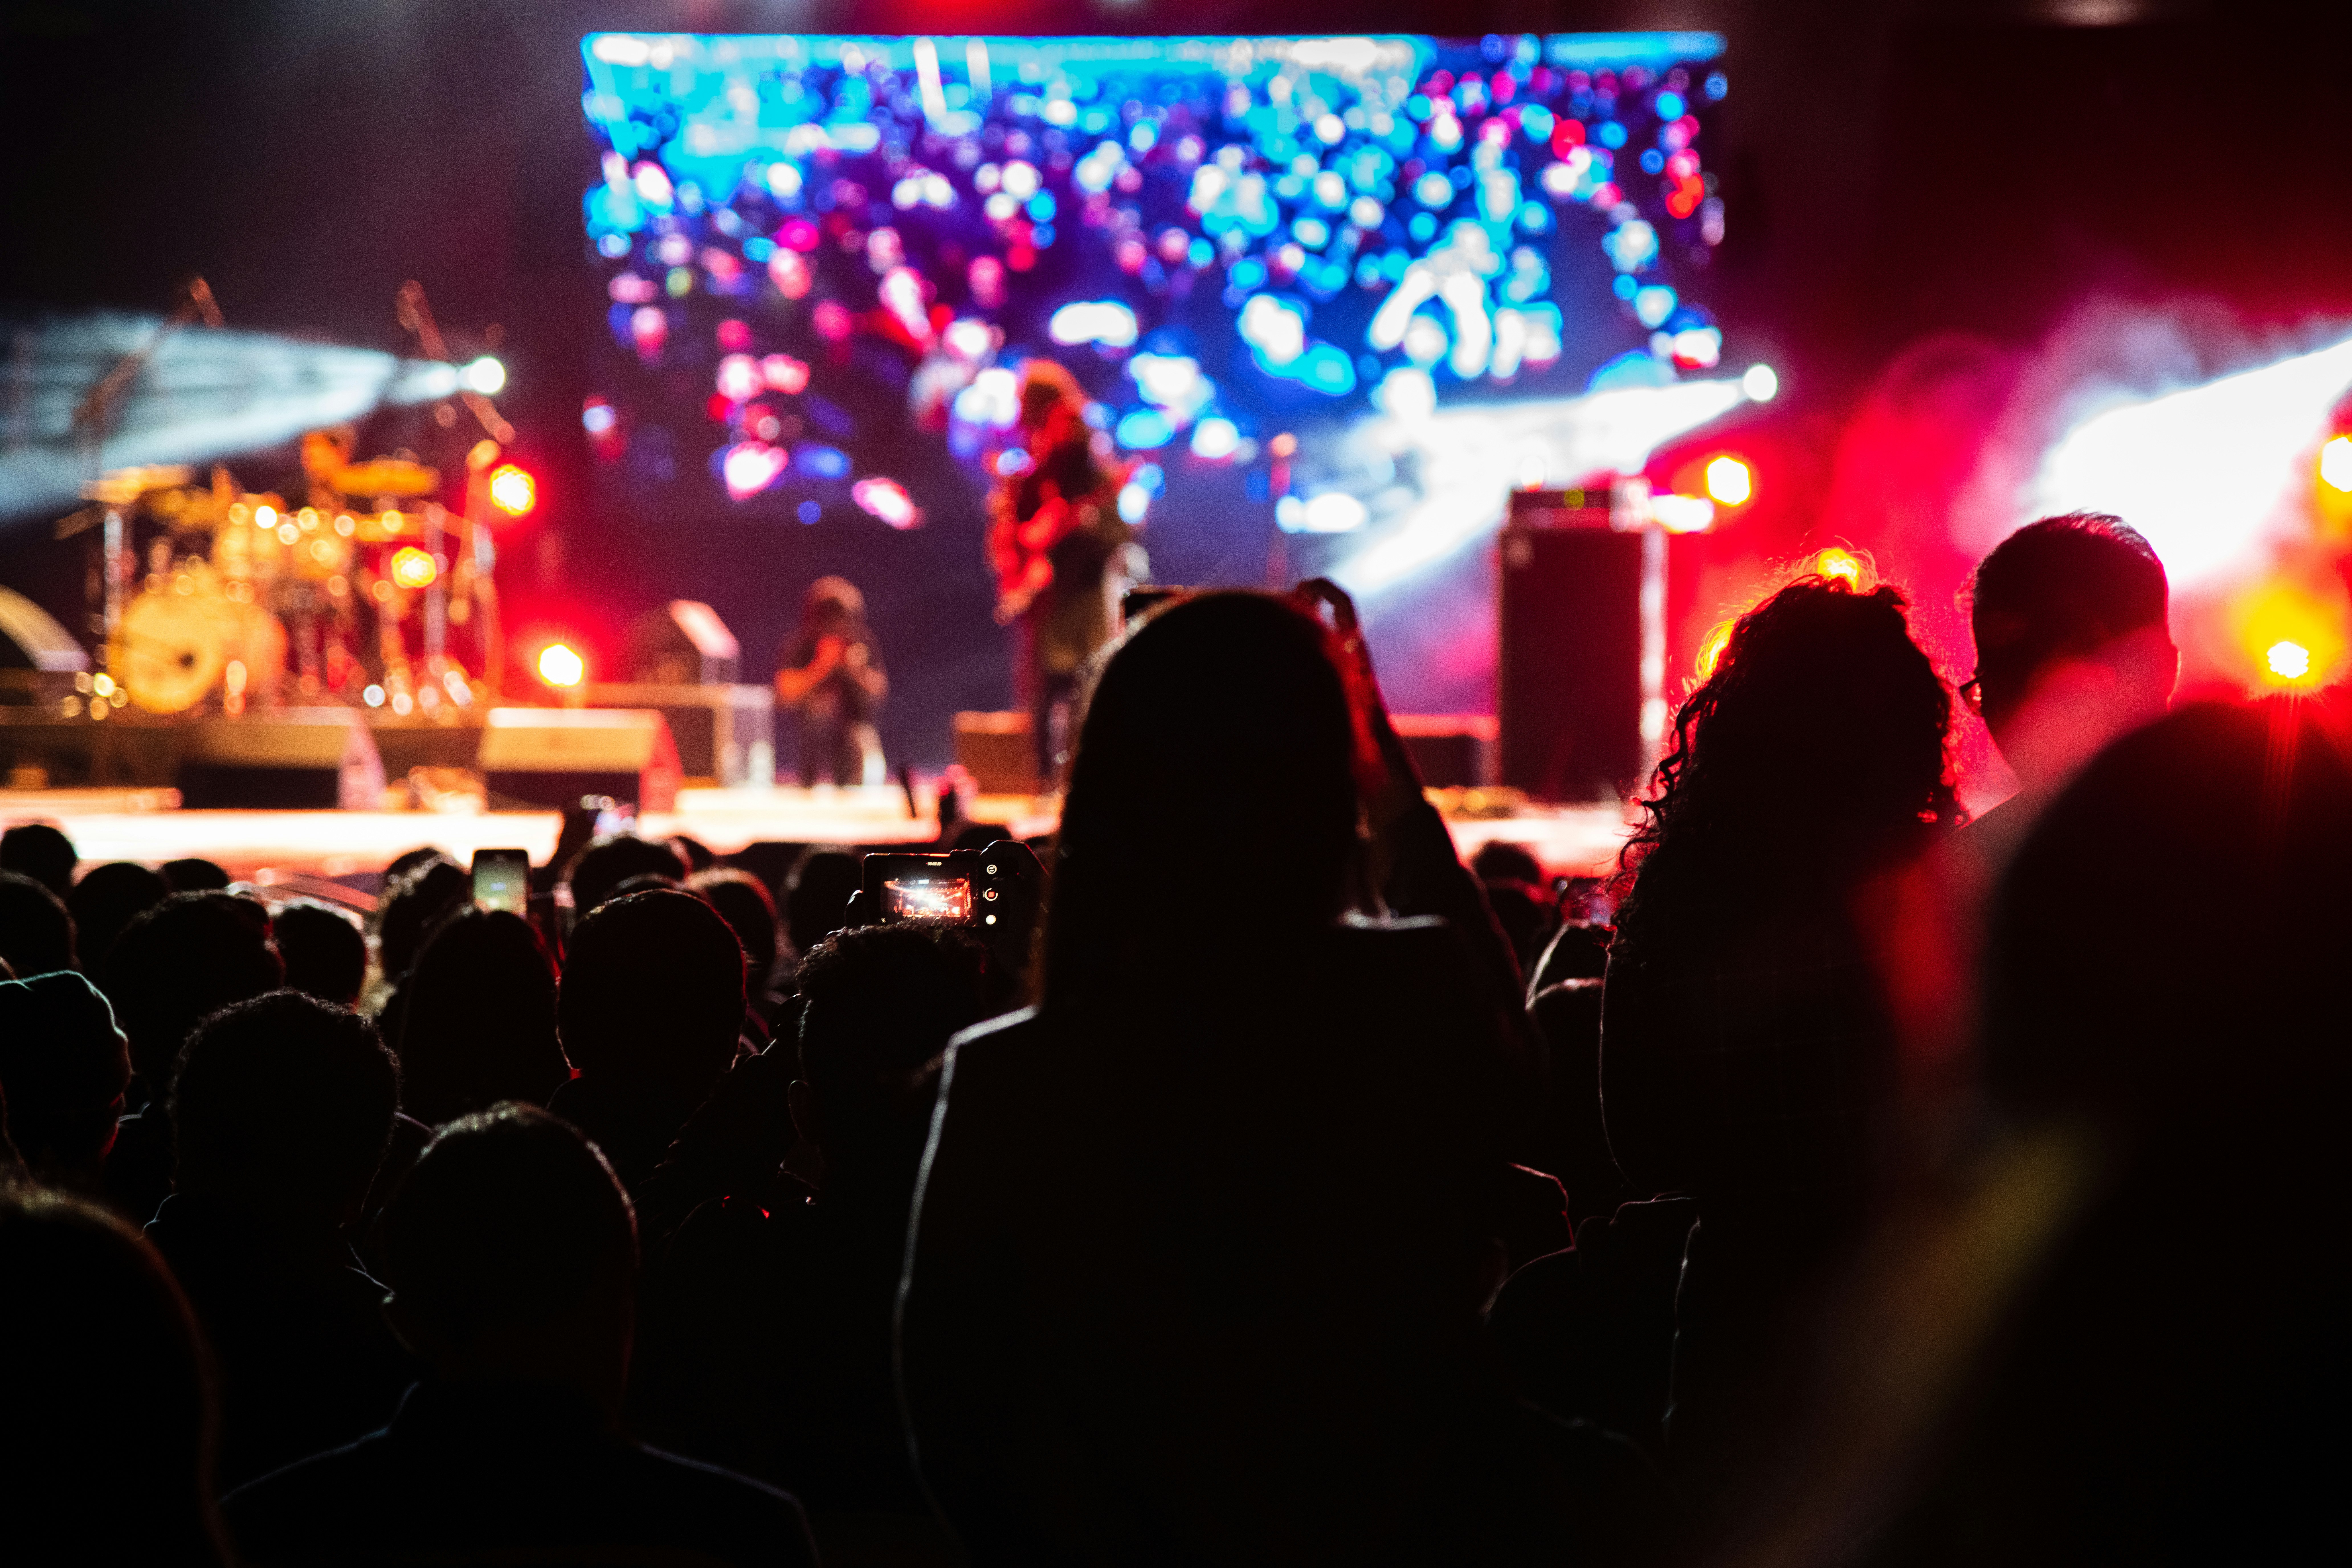 selective focus photography of woman standing near band group performing on stage